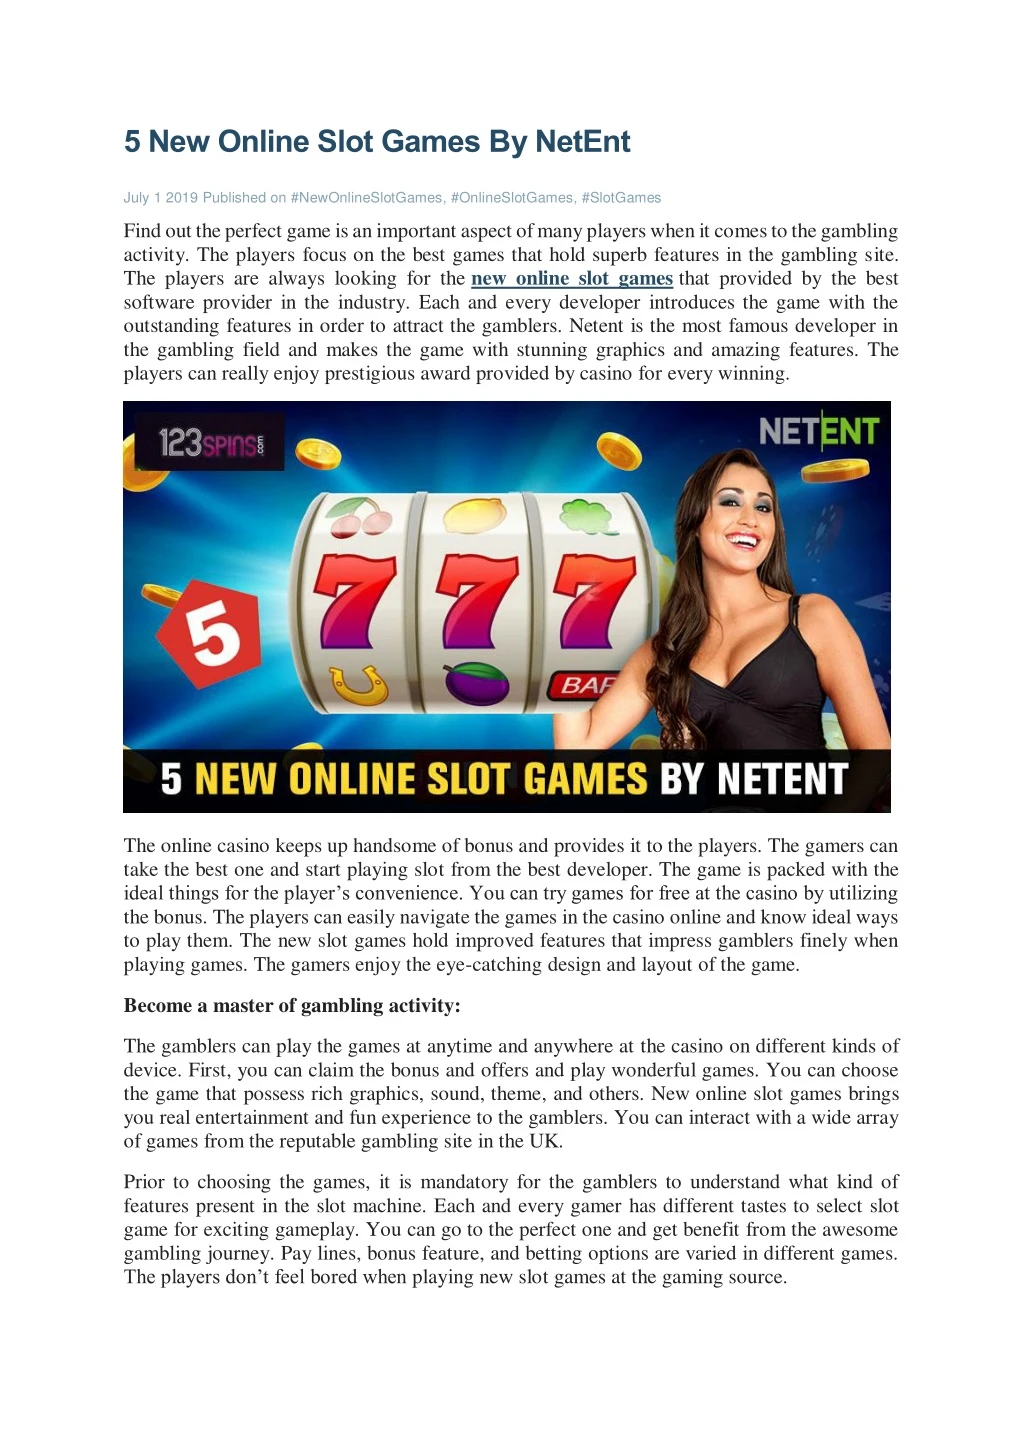 5 new online slot games by netent